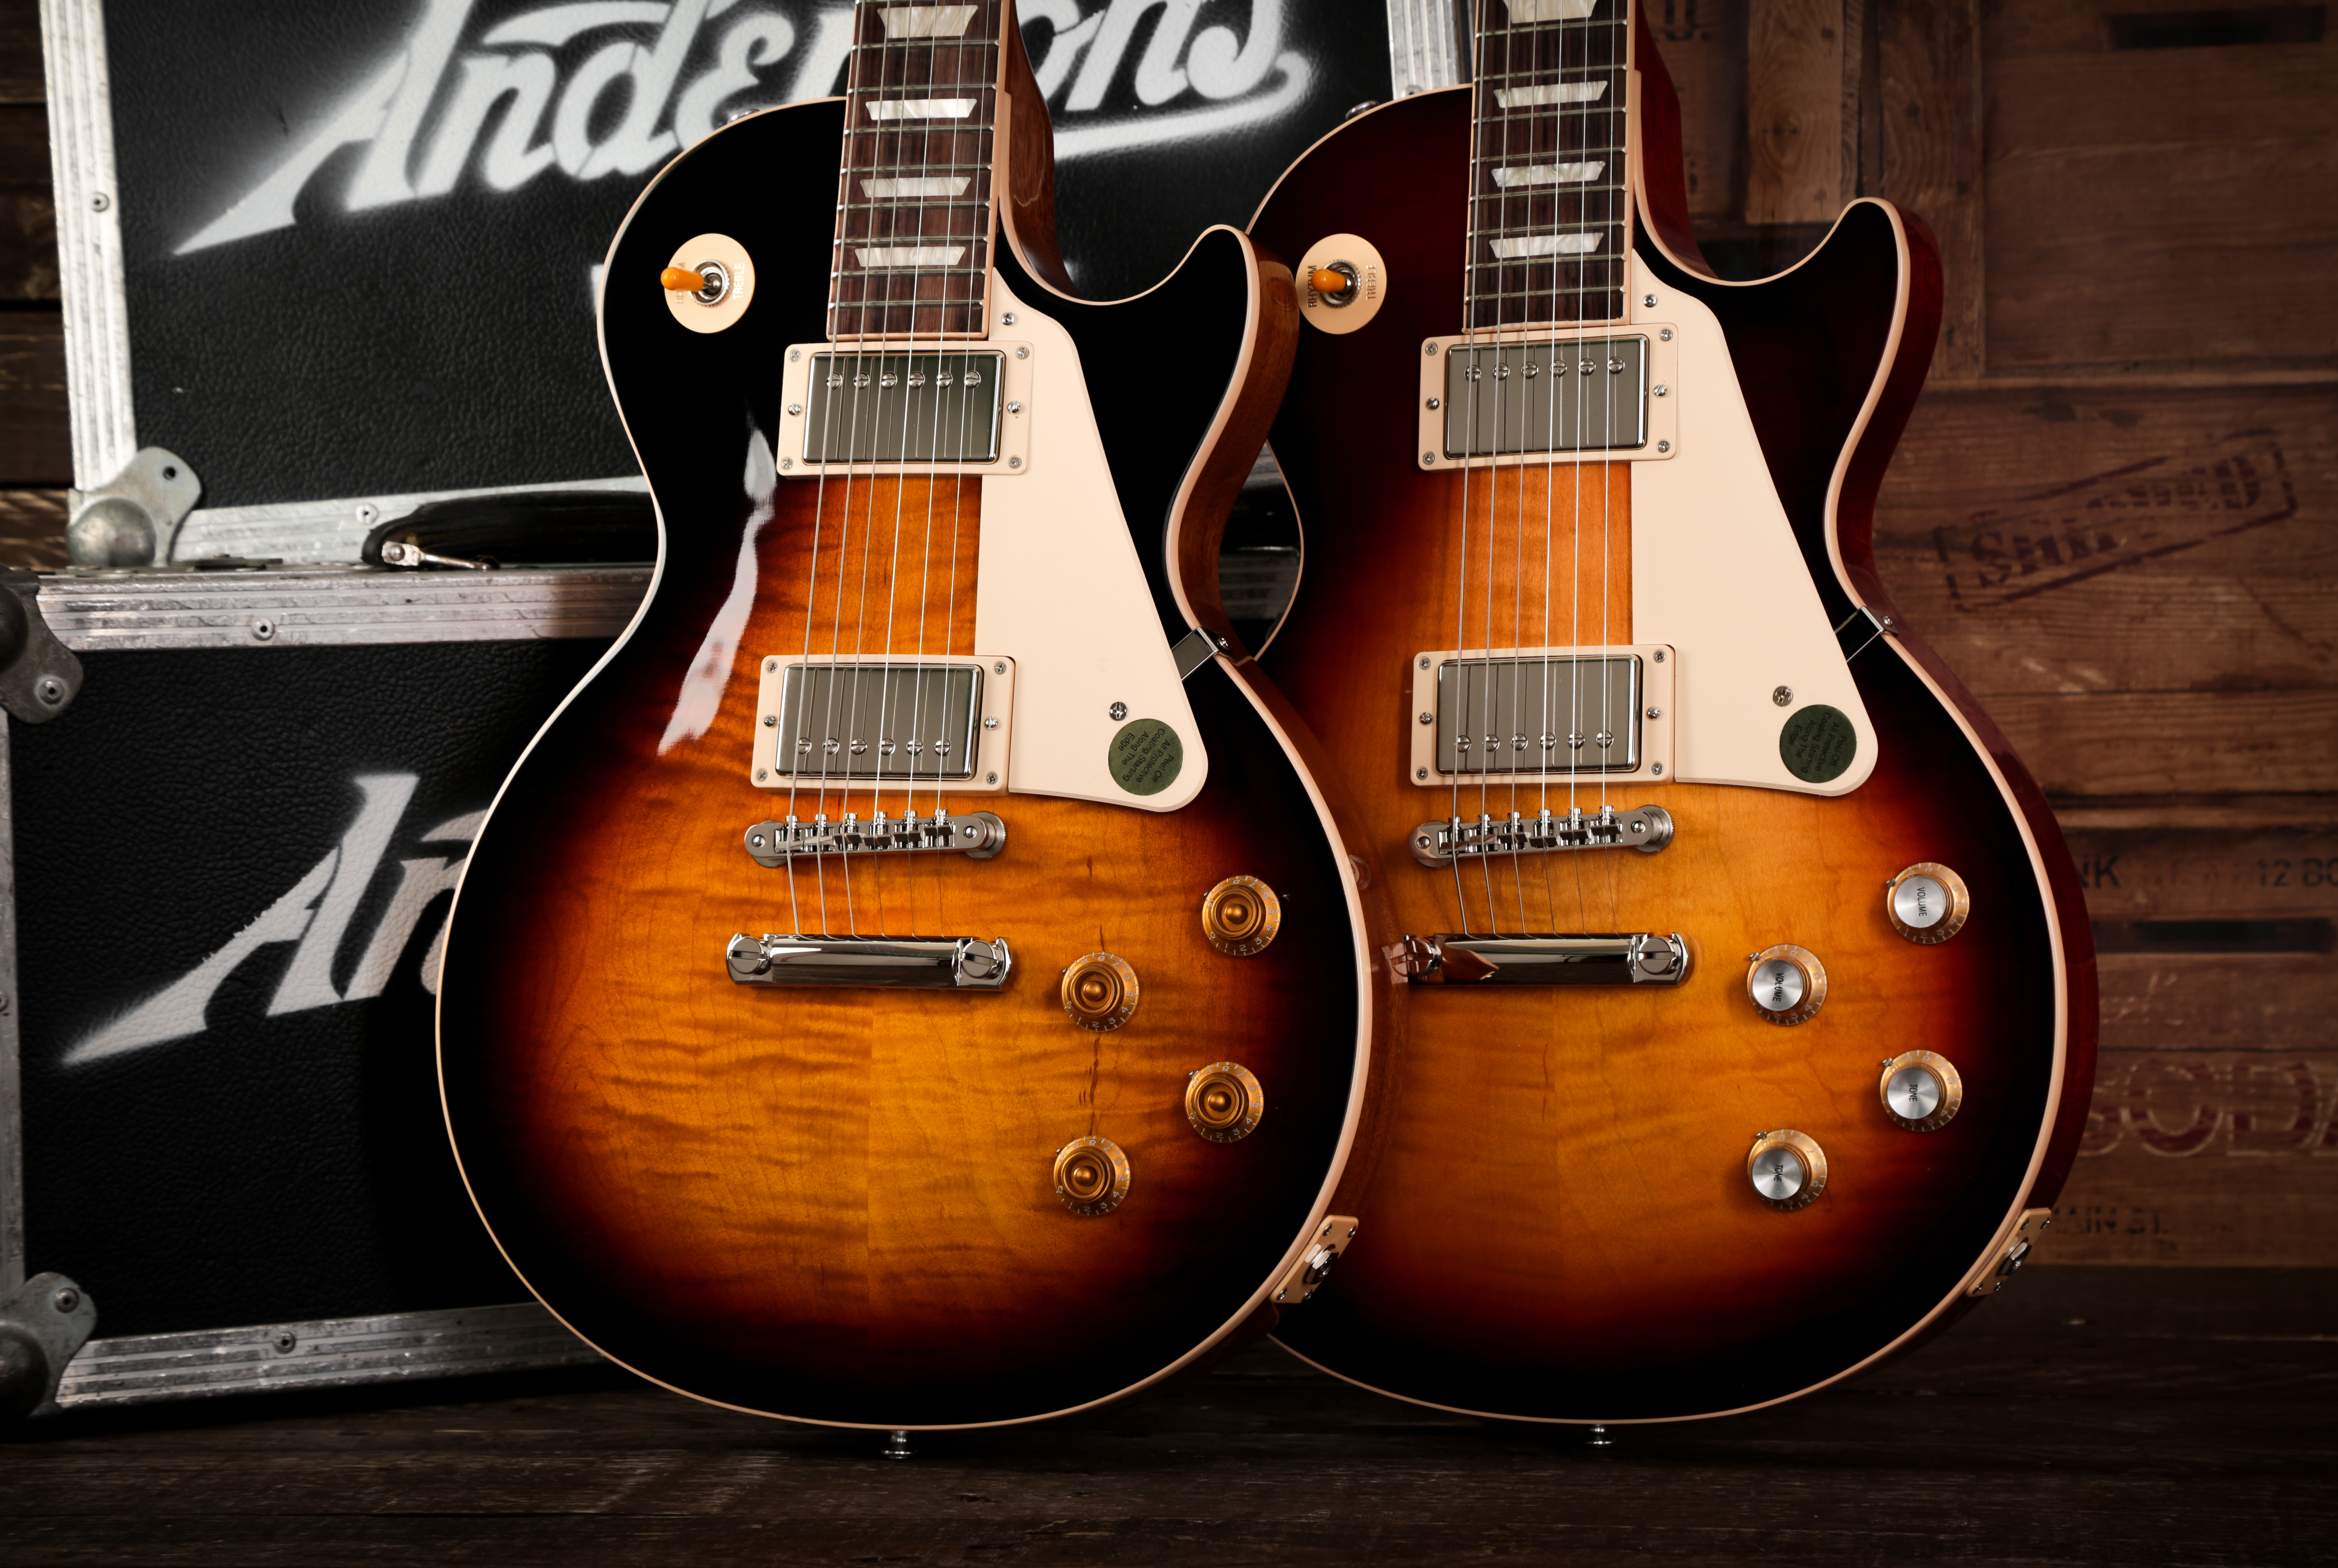 mod Fordeling smøre 50s vs '60s Les Paul Guitars: What's The Difference? - Andertons Blog